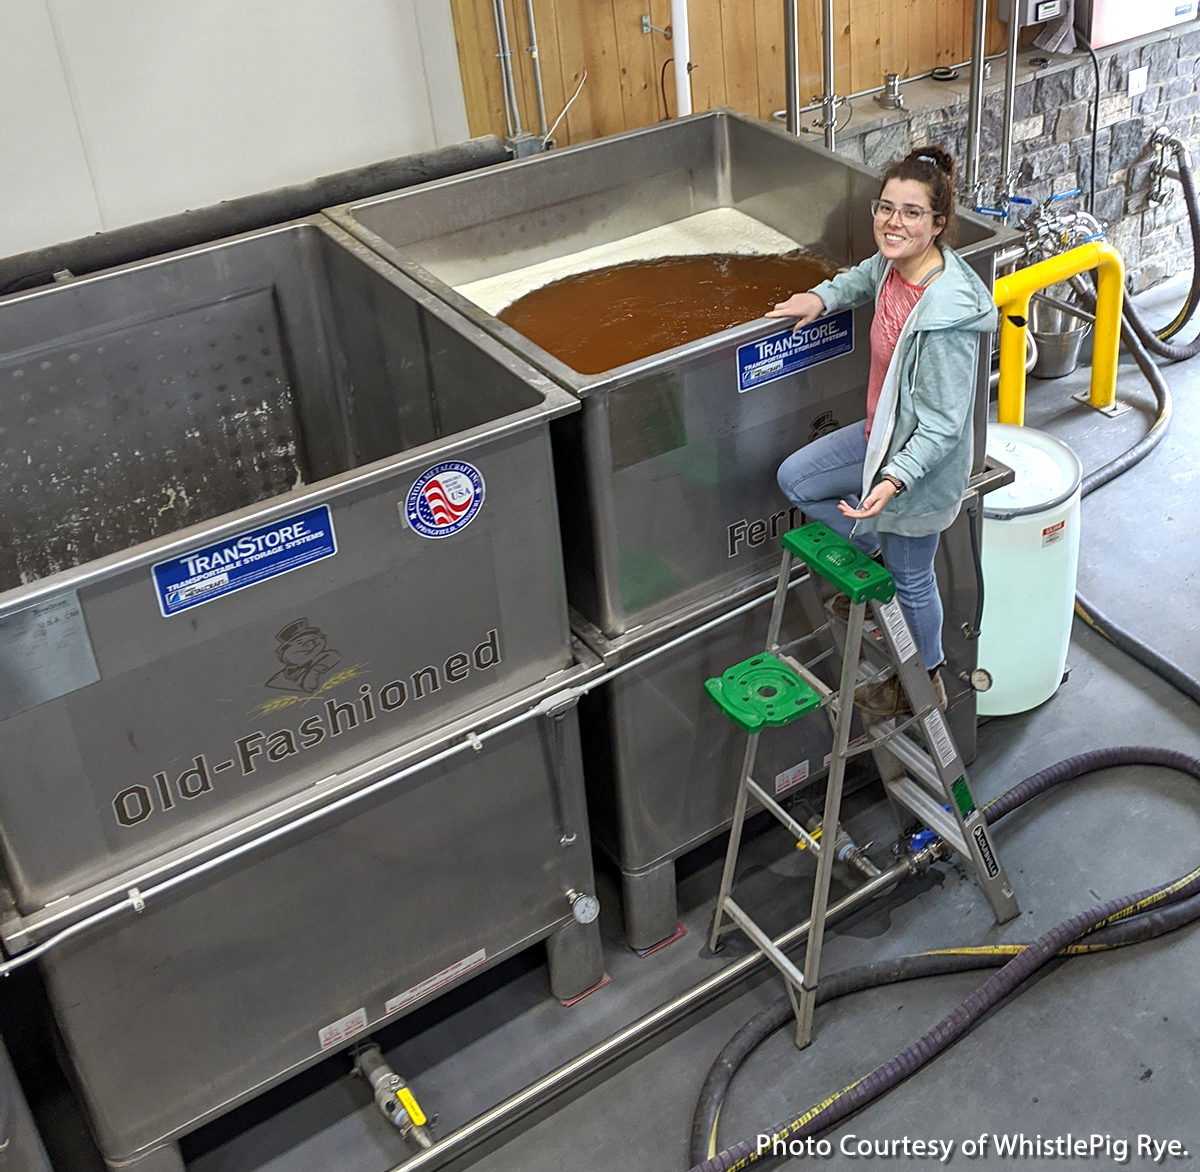 WhistlePig Farm distillery manager Emily Harrison fills a fermenter with surplus beer to be distilled into whisky. Photo courtesy WhistlePig Whiskey.